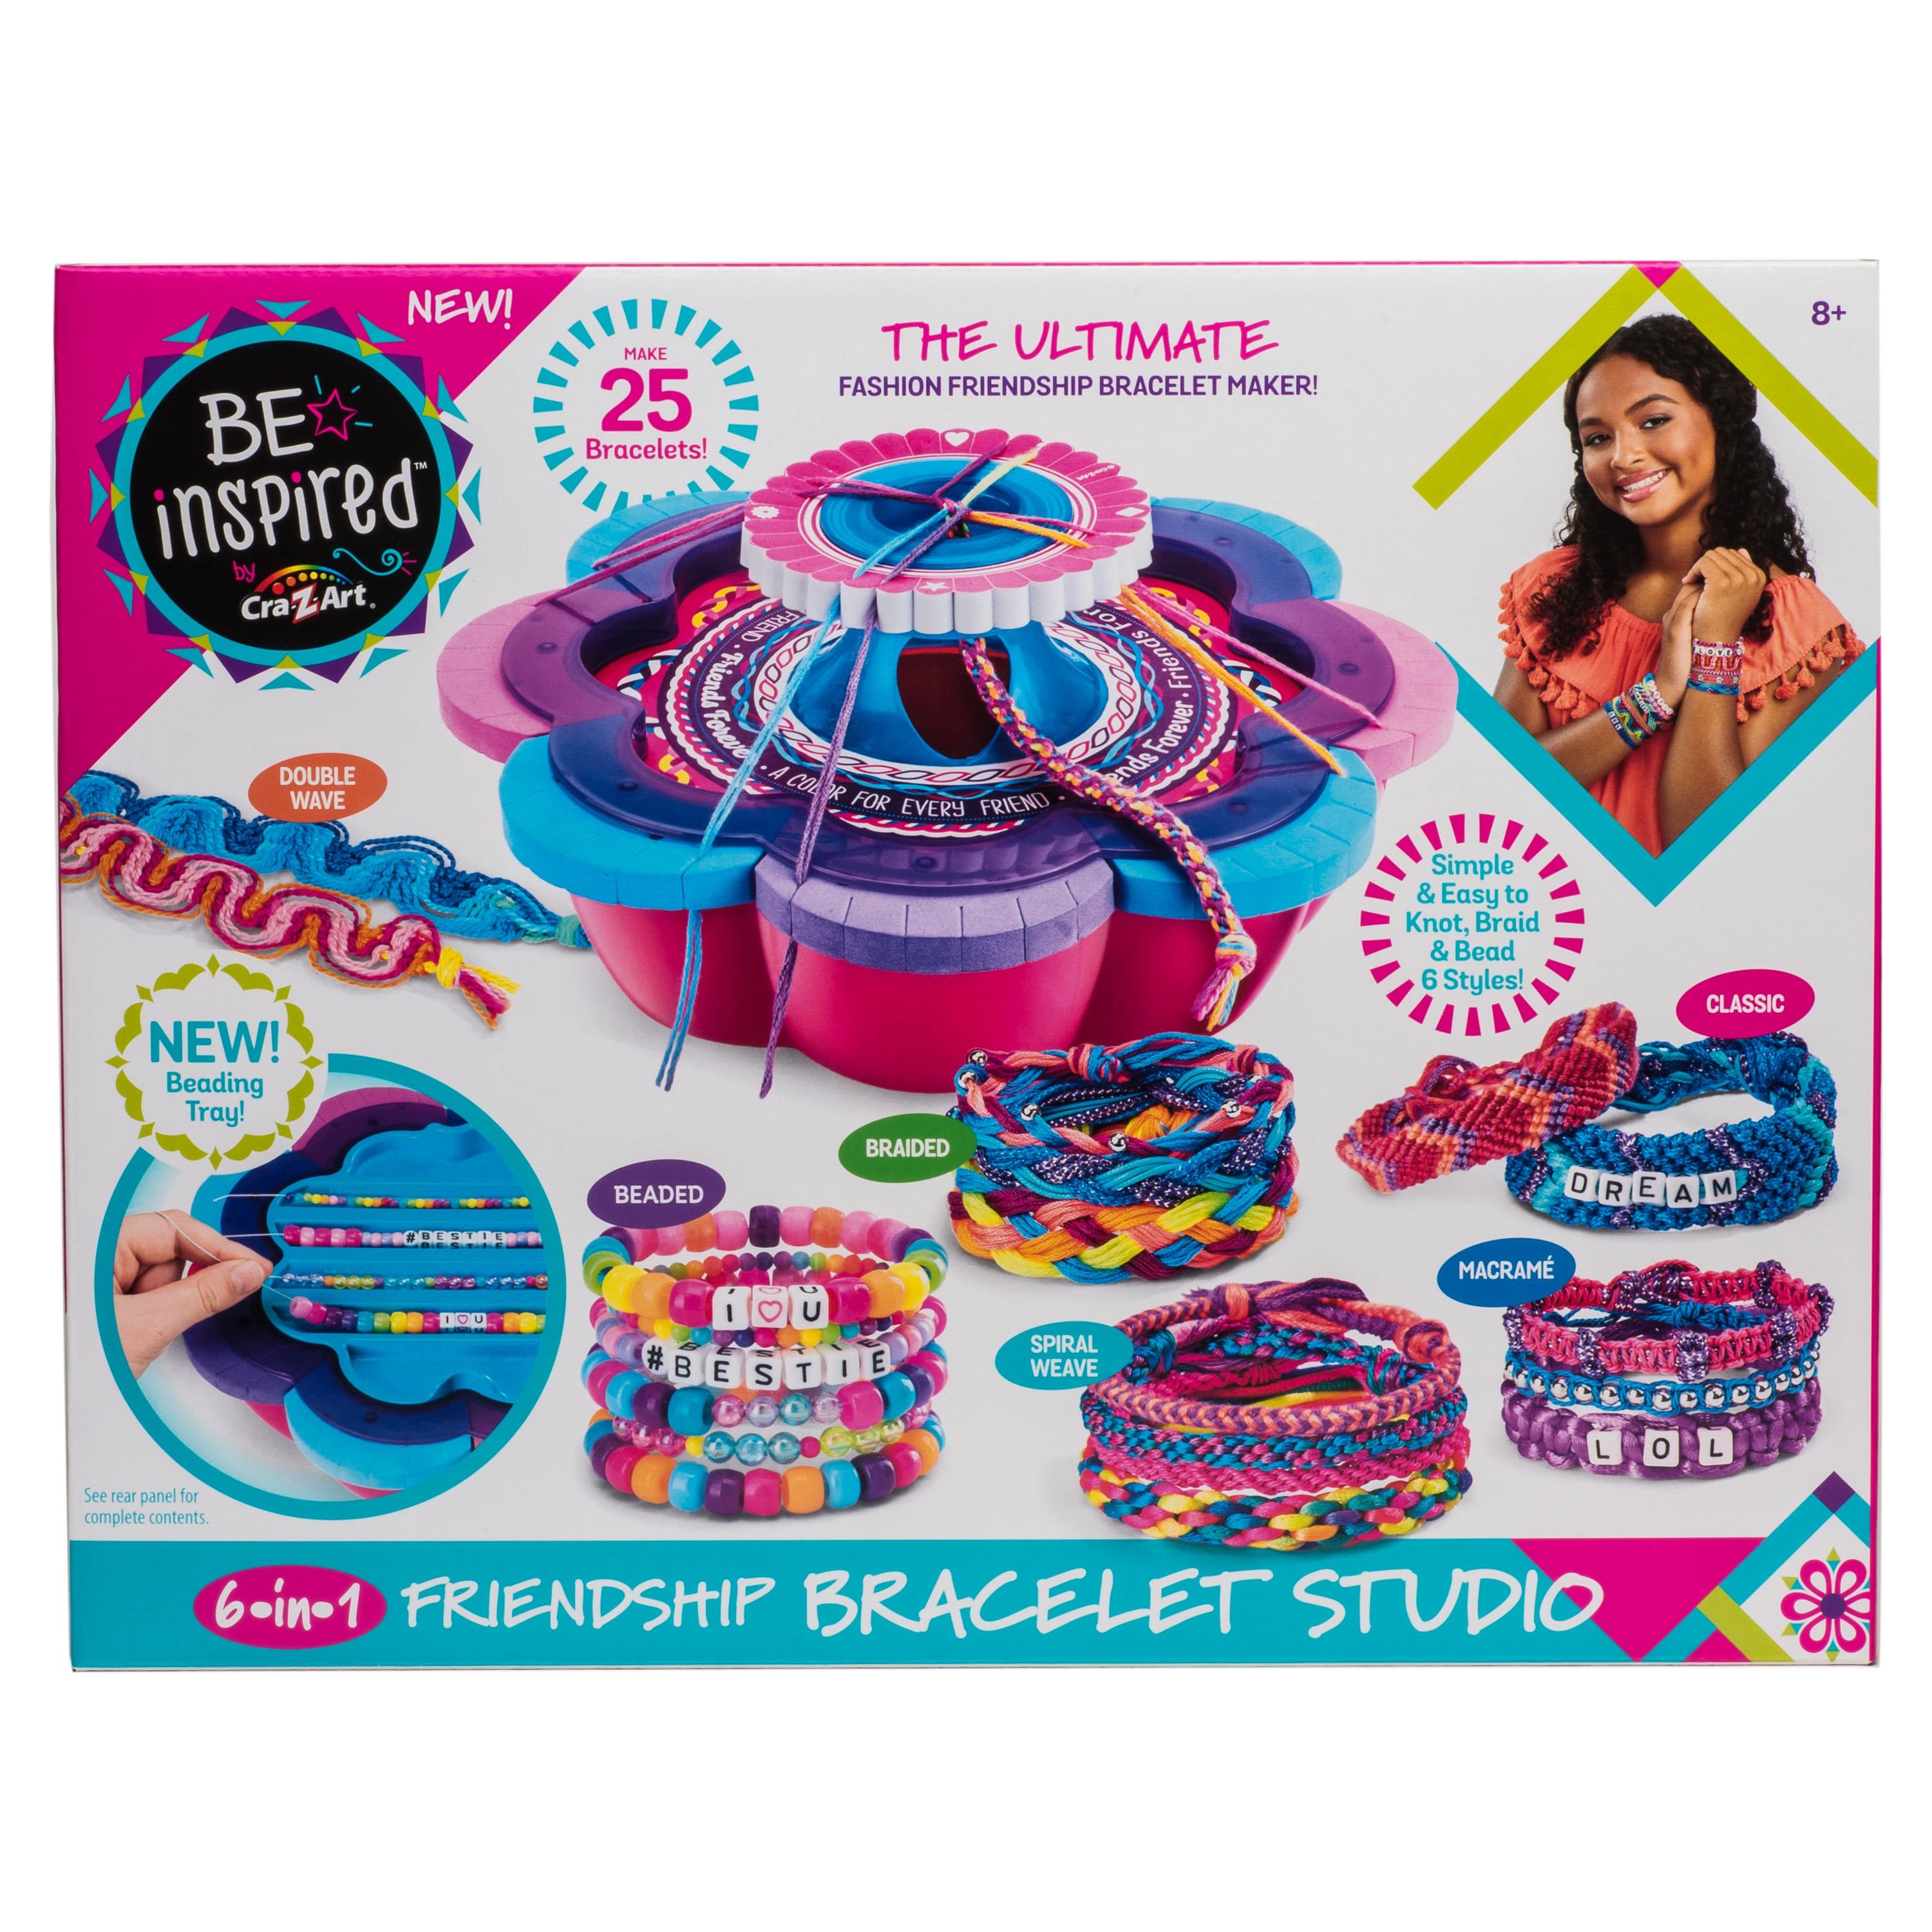 Cra-Z-Art Be Inspired 5-in-1 Friendship Bracelet Studio for Girls 6 Years of Age and Older - image 1 of 13